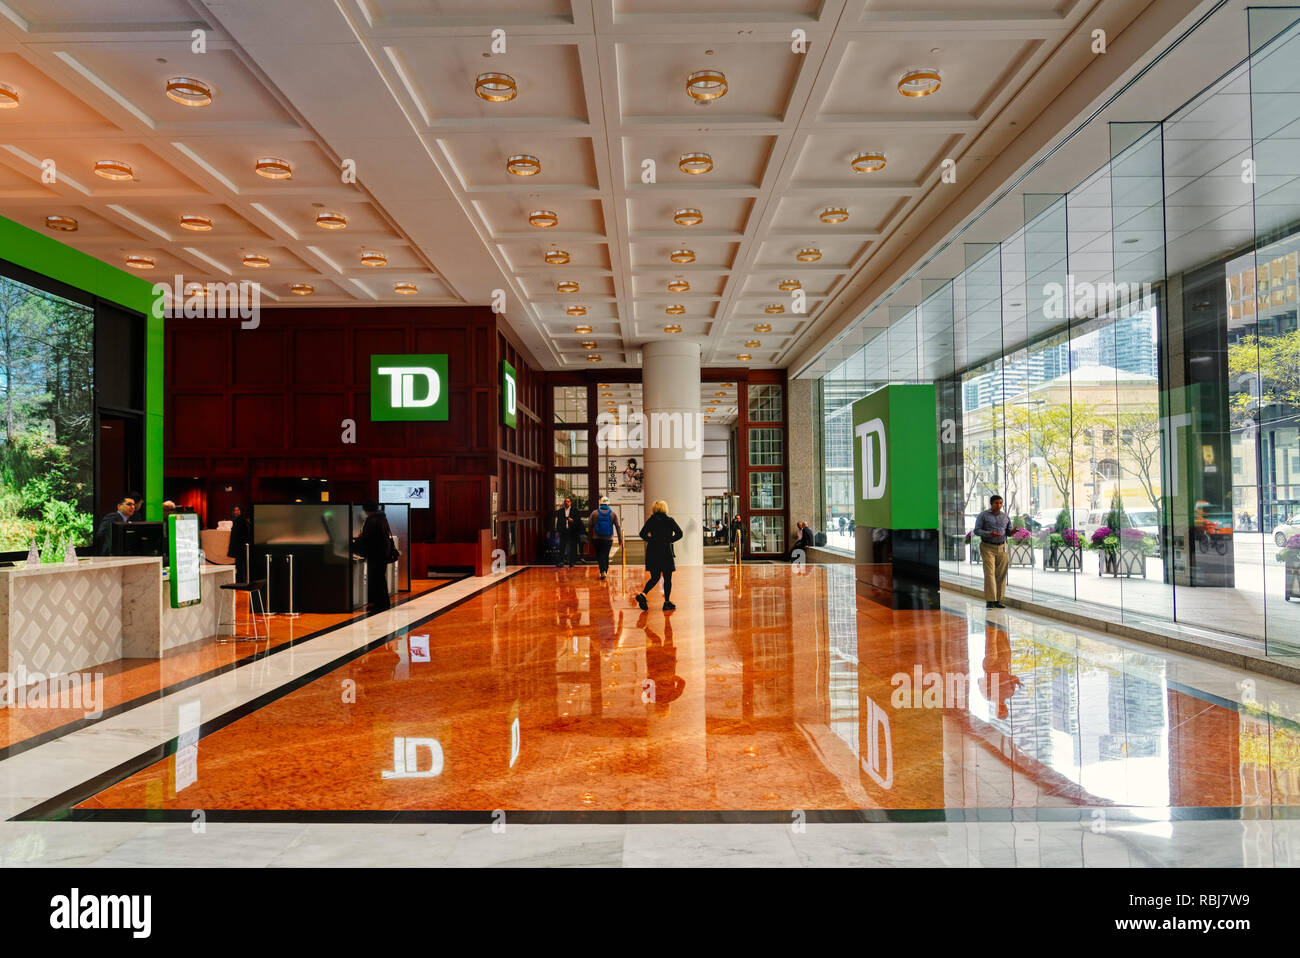 Inside the reception area of the TD Canada Trust bank headquarters on Bay Street in Toronto Canada Stock Photo